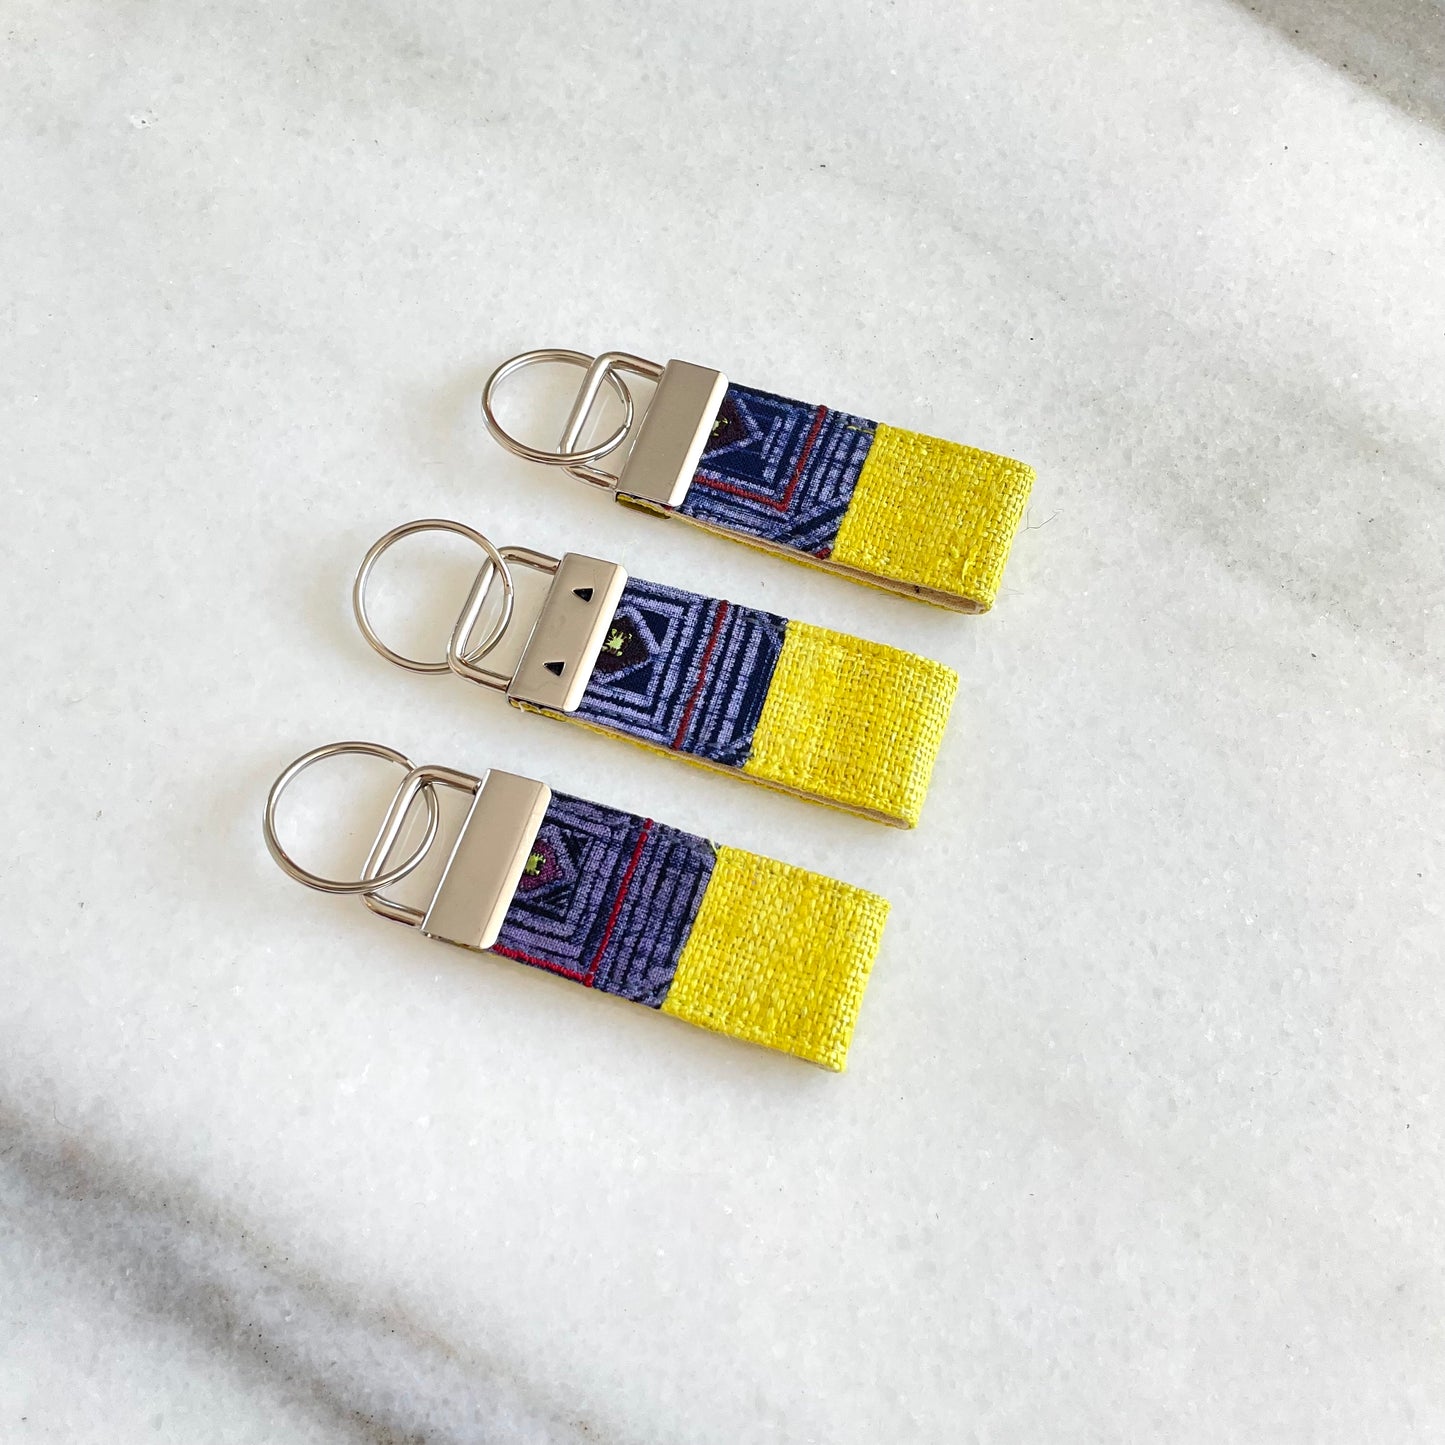 Bright yellow hemp fabric keychain with vintage batik patch, stainless metal key fob